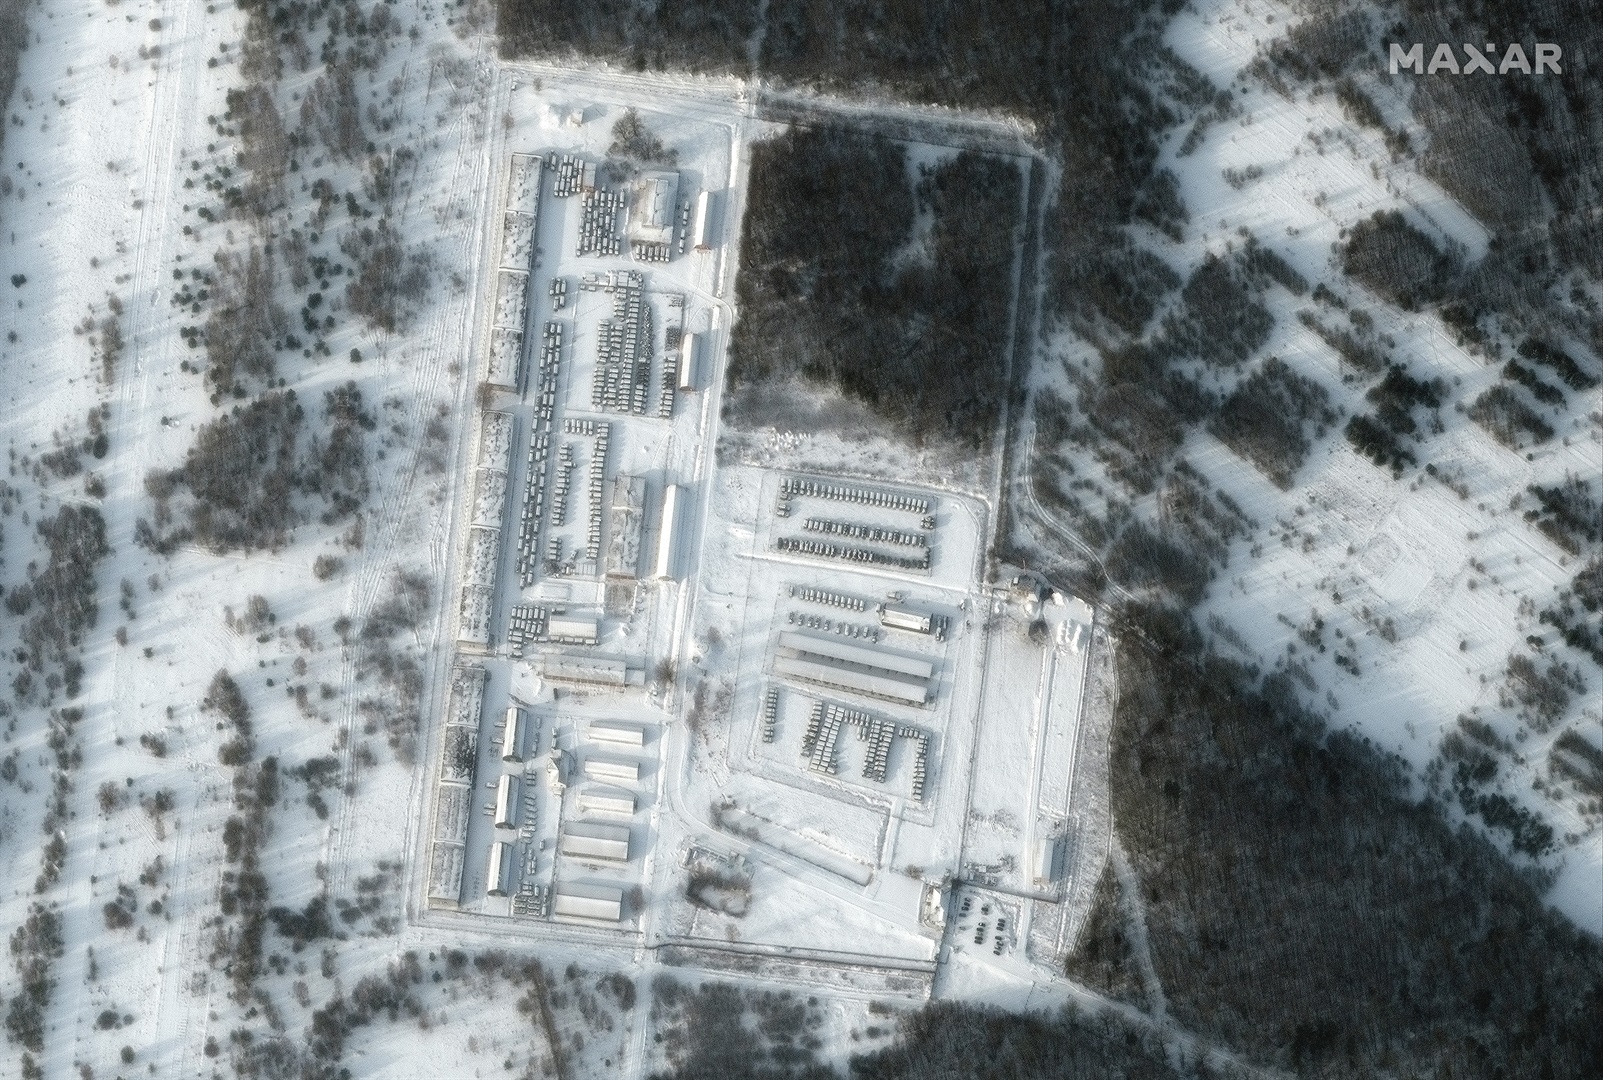 View of equipment deployed to facility in Klimovo, Russia on Jan. 19, 2022. Satellite image ©2022 Maxar Technologies